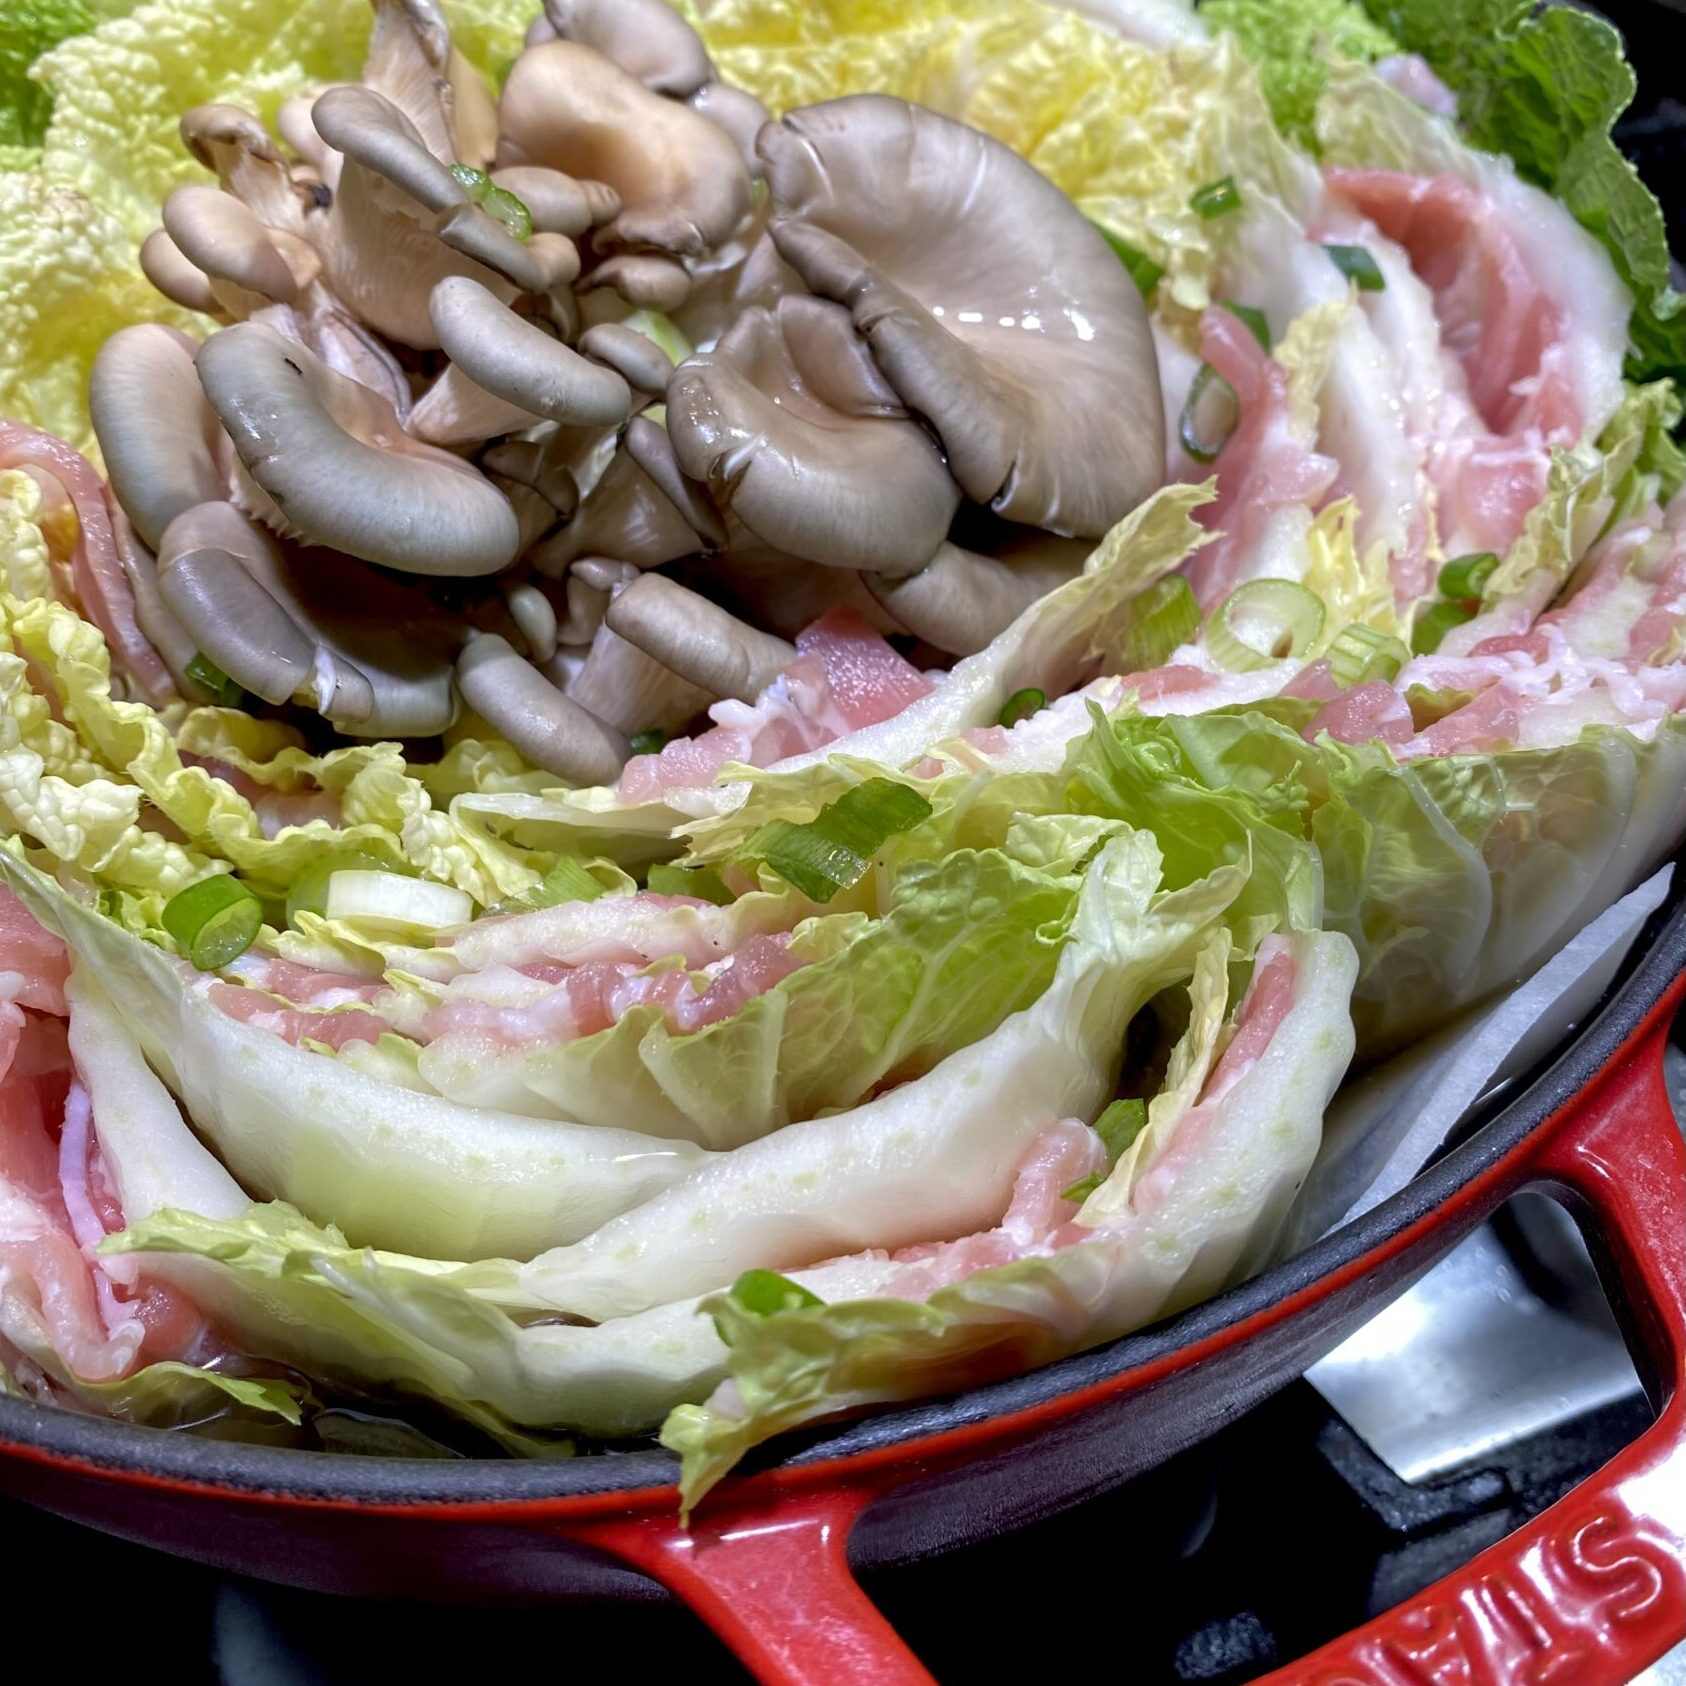 Mille-Feuille Nabe (Japanese Hot Pot) - Easy Recipes